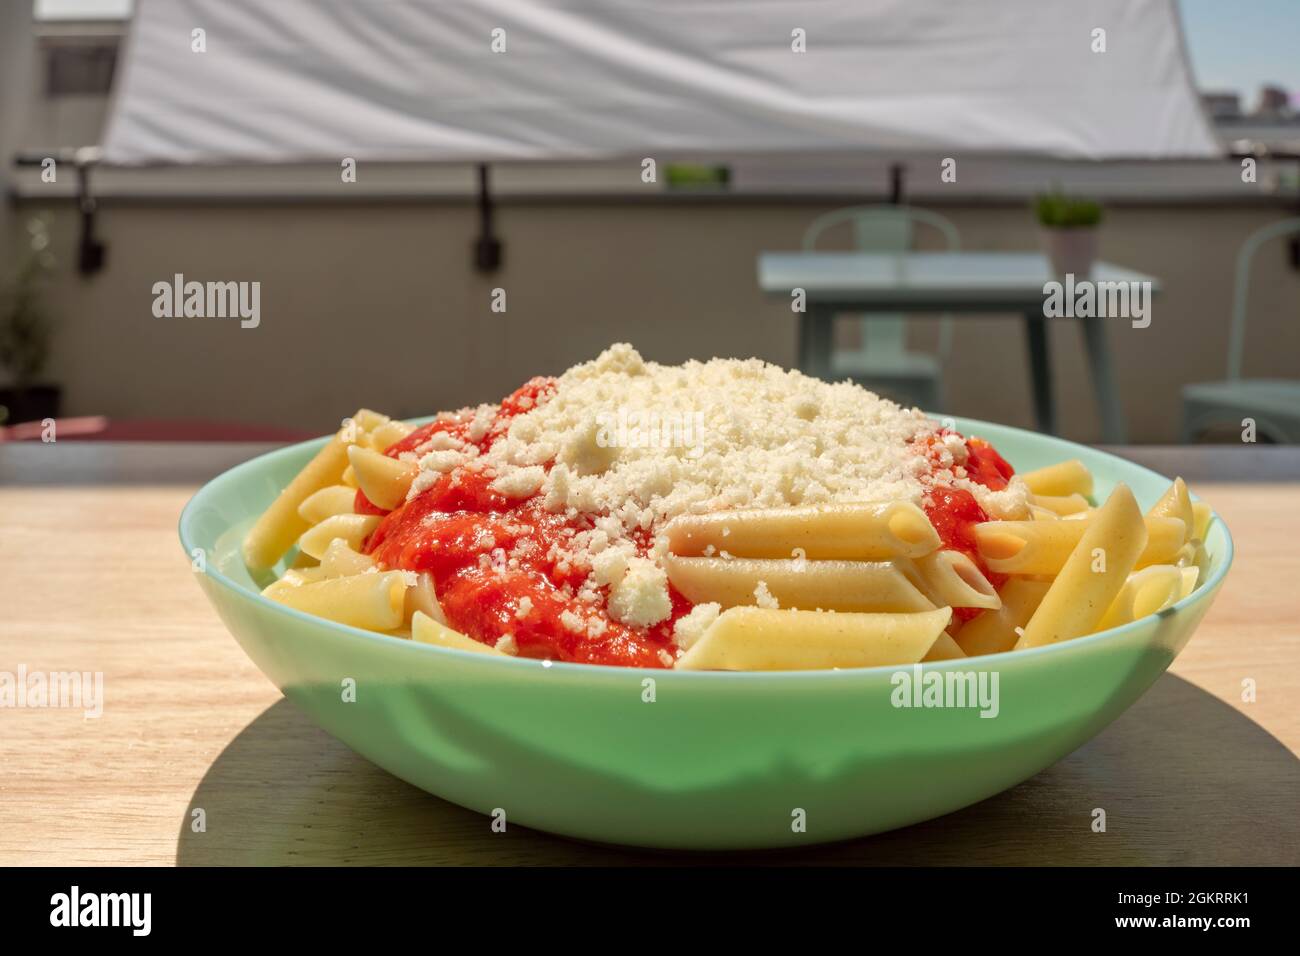 Blue plate of macaroni and cheese and tomato served on an urban terrace Stock Photo